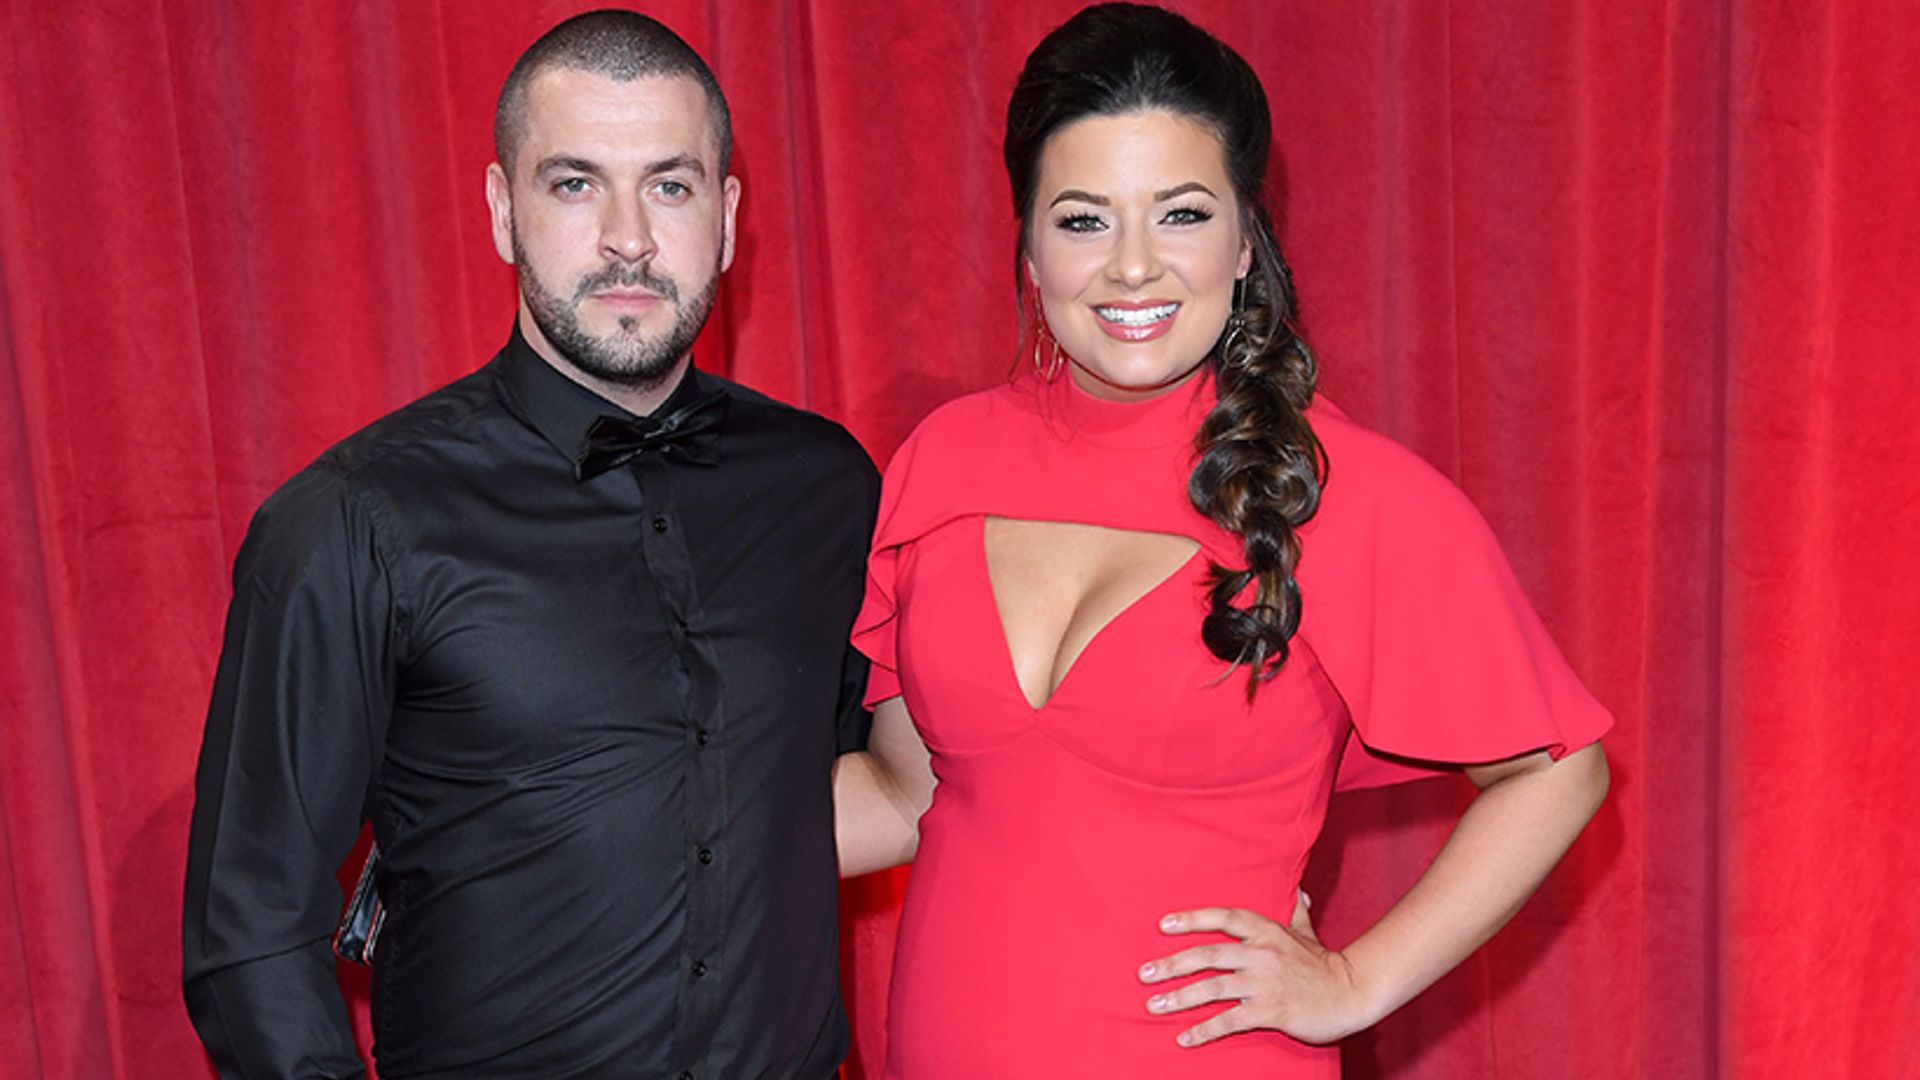 Coronation Street’s Shayne Ward engaged to Sophie Austin - see the ring!